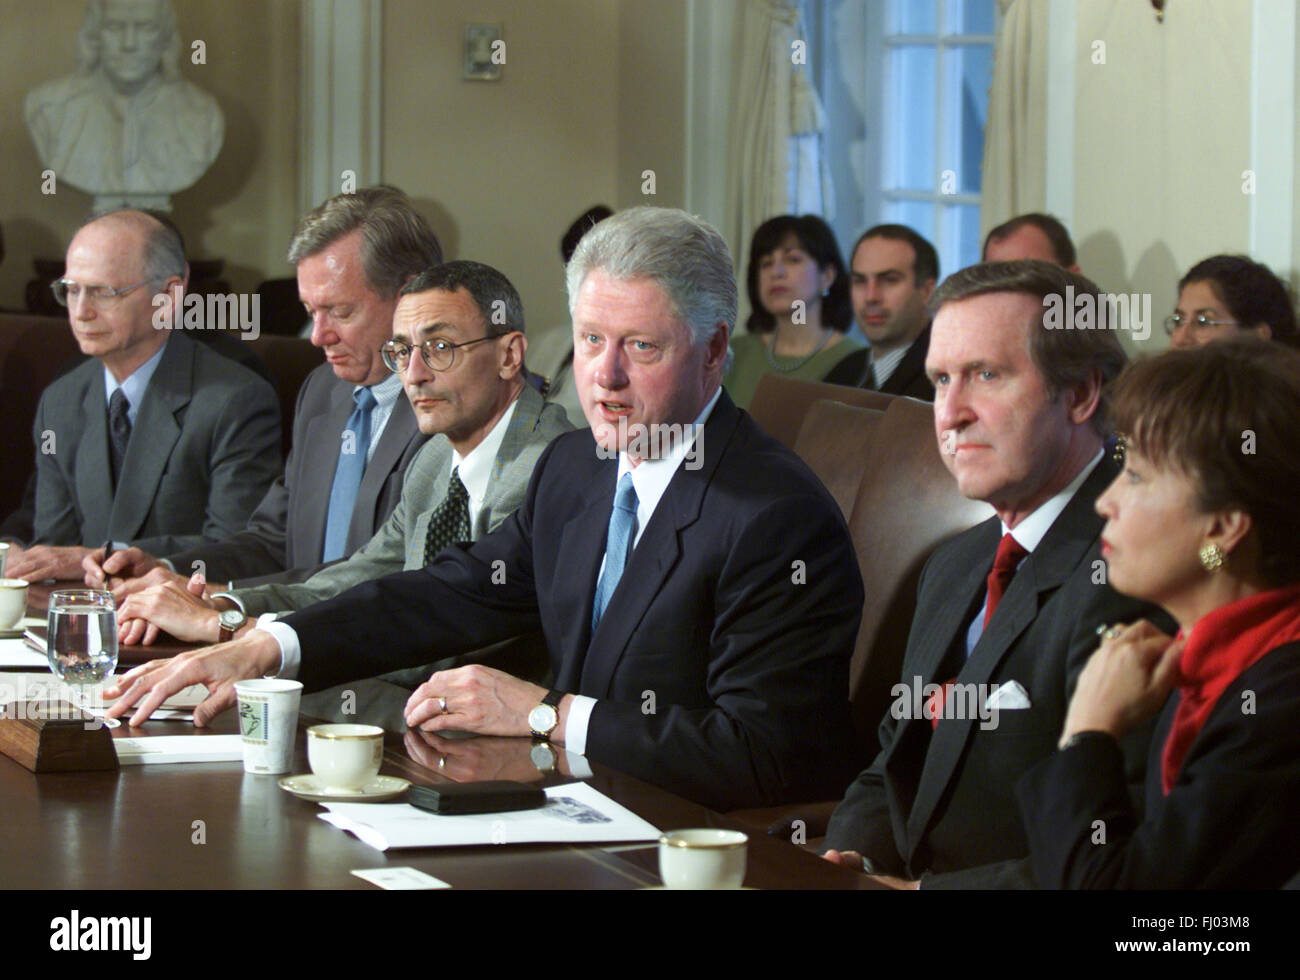 United States President Bill Clinton Makes Remarks During A